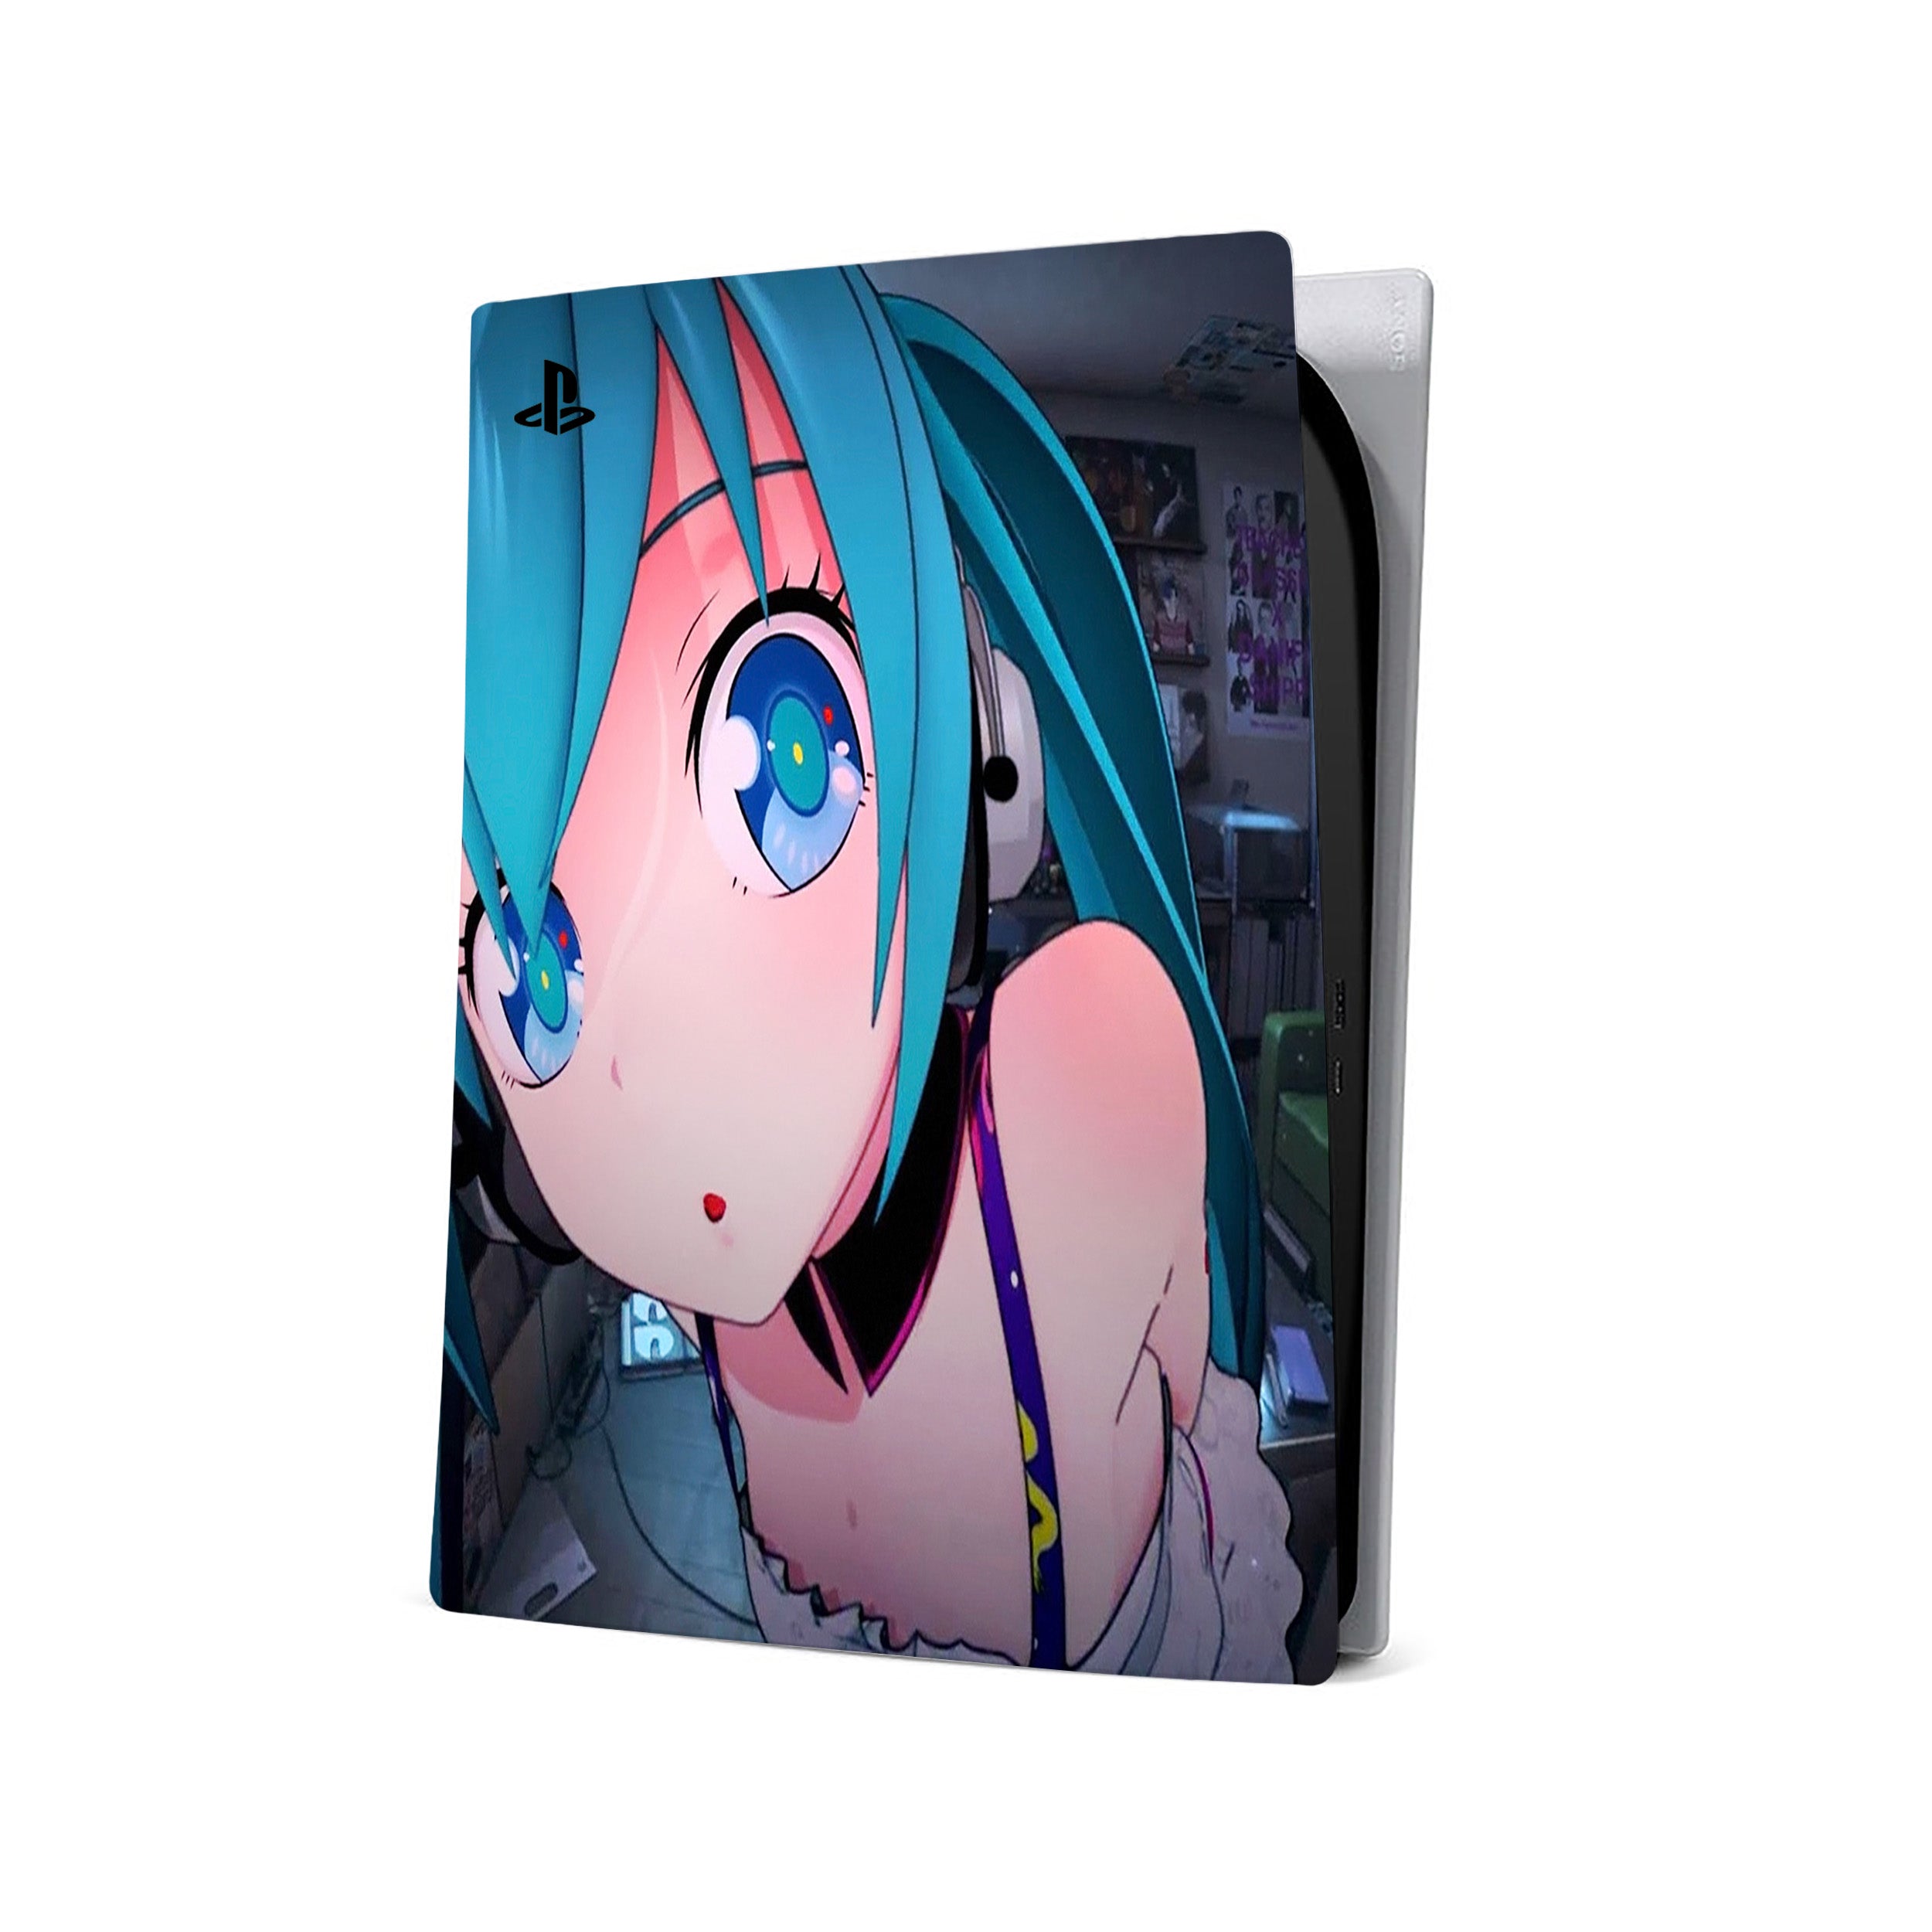 A video game skin featuring a Anime Blue Haired Girl design for the PS5.